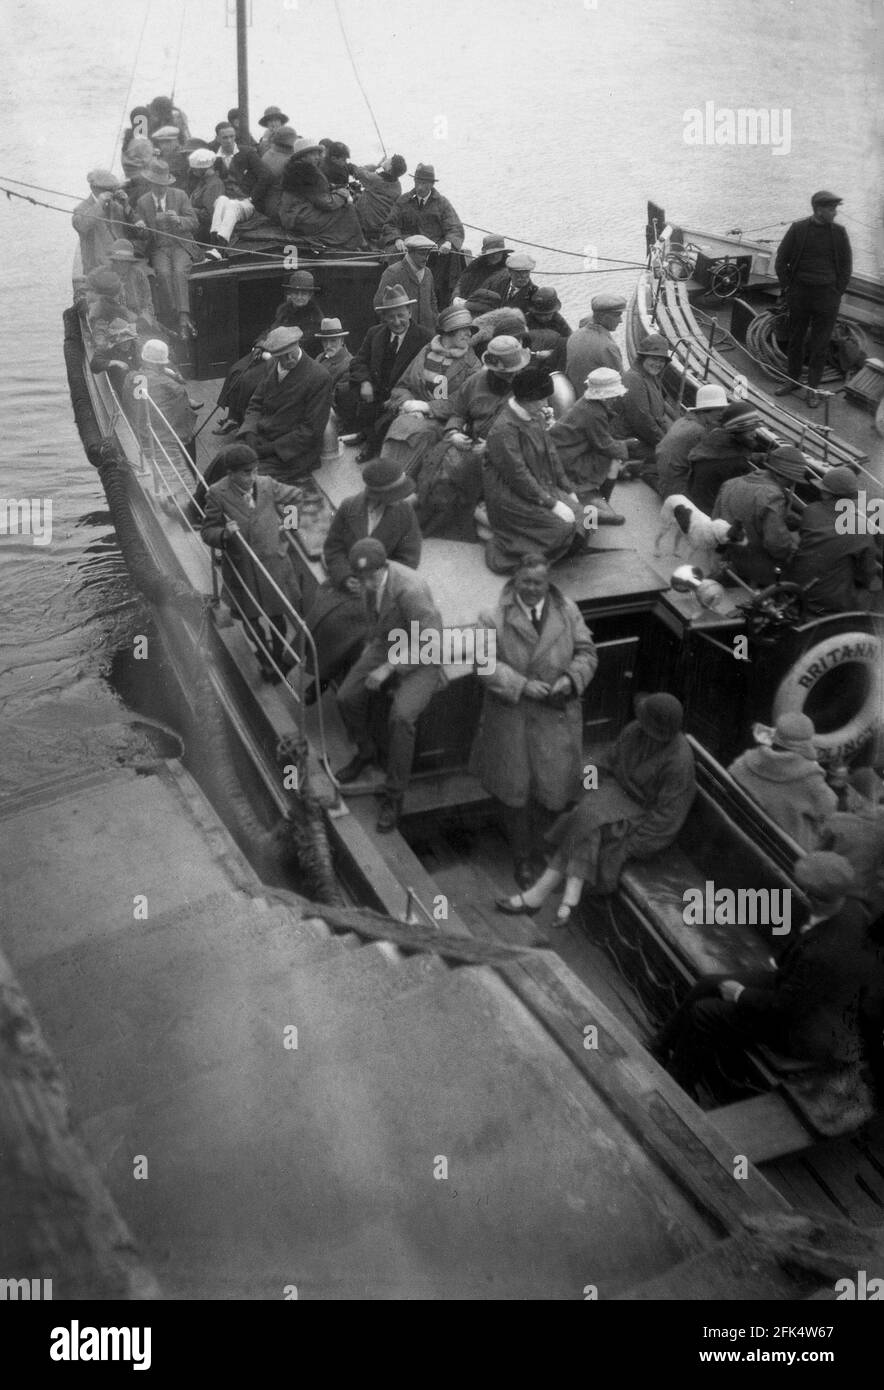 1930s, Beside some steps, at the quayside, possibly at Cleethorpes, flat caps a plenty as men, women and school children crowd on the pleasure boat, 'Britannia' for a trip. An excursion by boat from Bridlington to the East Yorkshire seaside resort was popular in this era and up to the mid- 1950s, there were five large pleasure boats offering such journeys. Built in 1923 by Hayward & Croxan in Southend-on-Sea, the motor boat, Britannia ran excursions at Bridlington until the late 1960s. She was an open boat of between 50ft and 60ft and passengers sat where they could find a space. Stock Photo